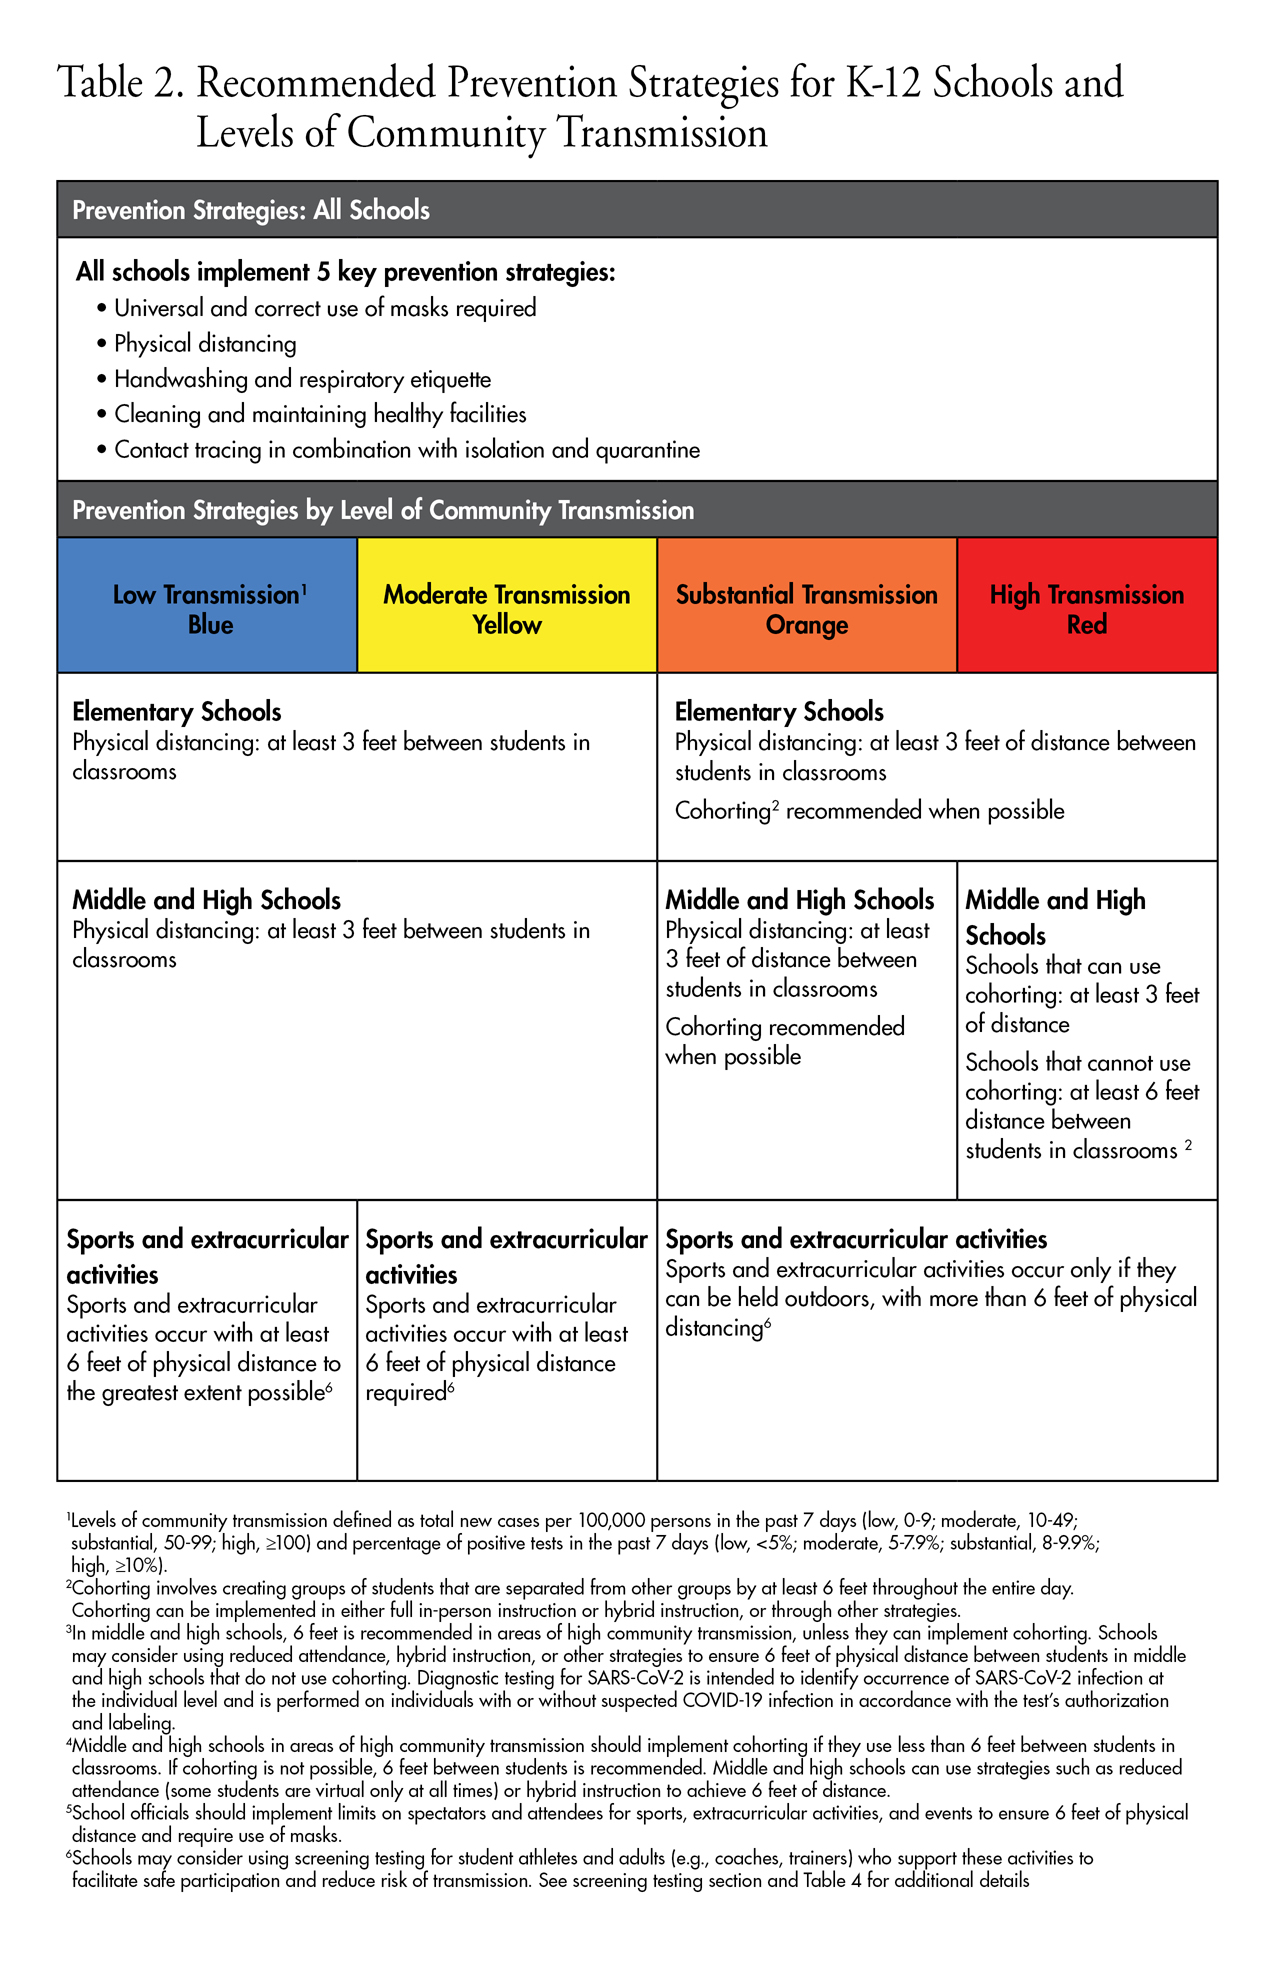 Table of Recommended Prevention Strategies for K-12 Schools and Levels of Community Transmission